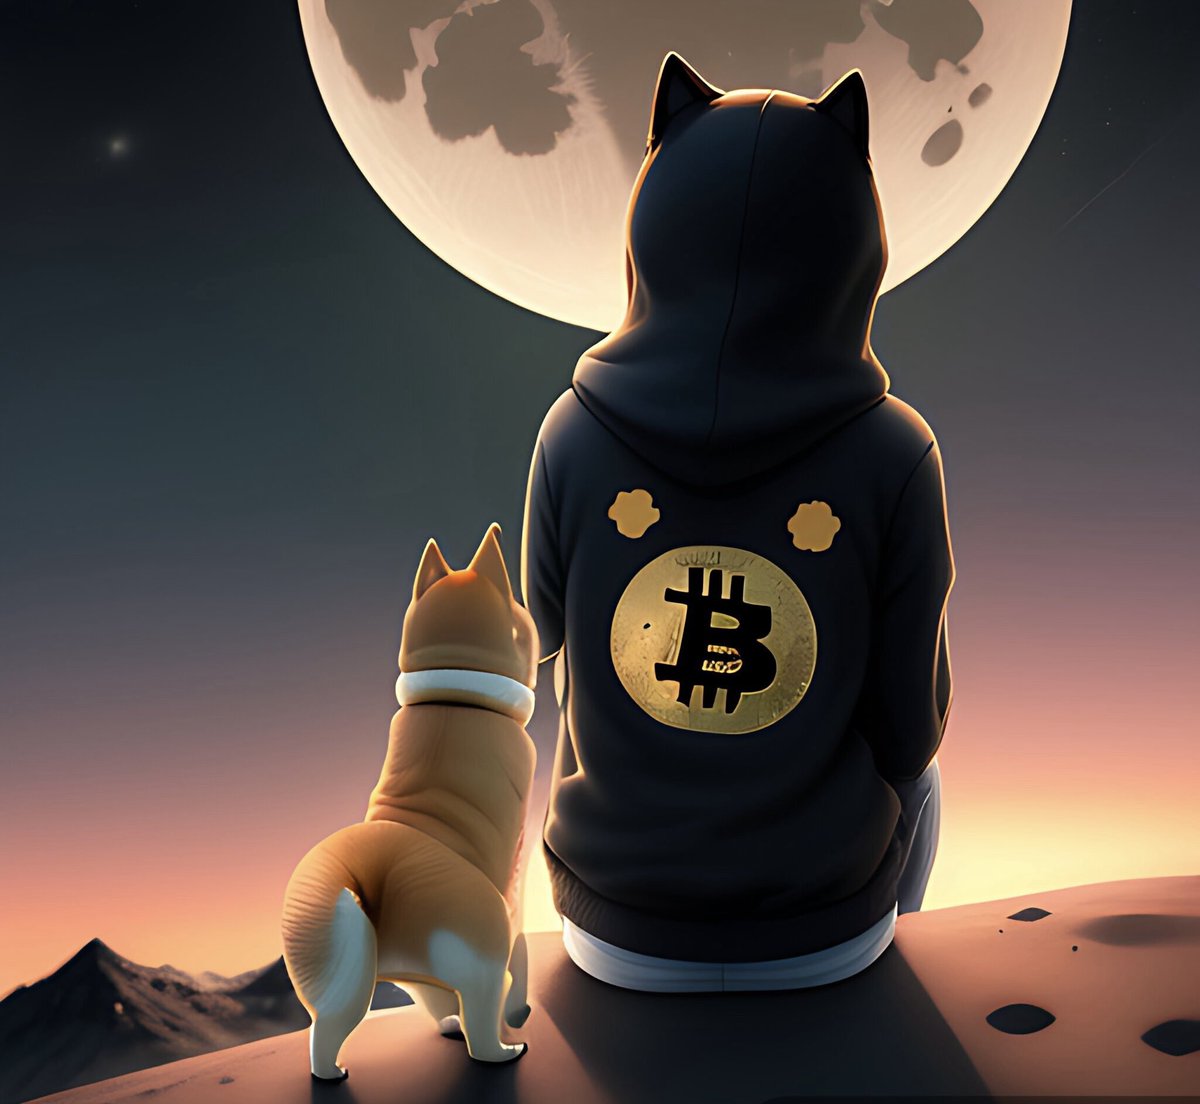 I’ve been having a lot of fun on Bitcoin 

Between Ordinals and runes, this space is a blast 

Not to mention, the badass communities that I’m in shoutout: @OGsatoshis @BitcoinBearsOrd @BitcoinWhales_ $DOG @SkullxNFT @bitdogs_btc @RuneGuardians @Magisat_io @BitcoinFrogs 

$beyond